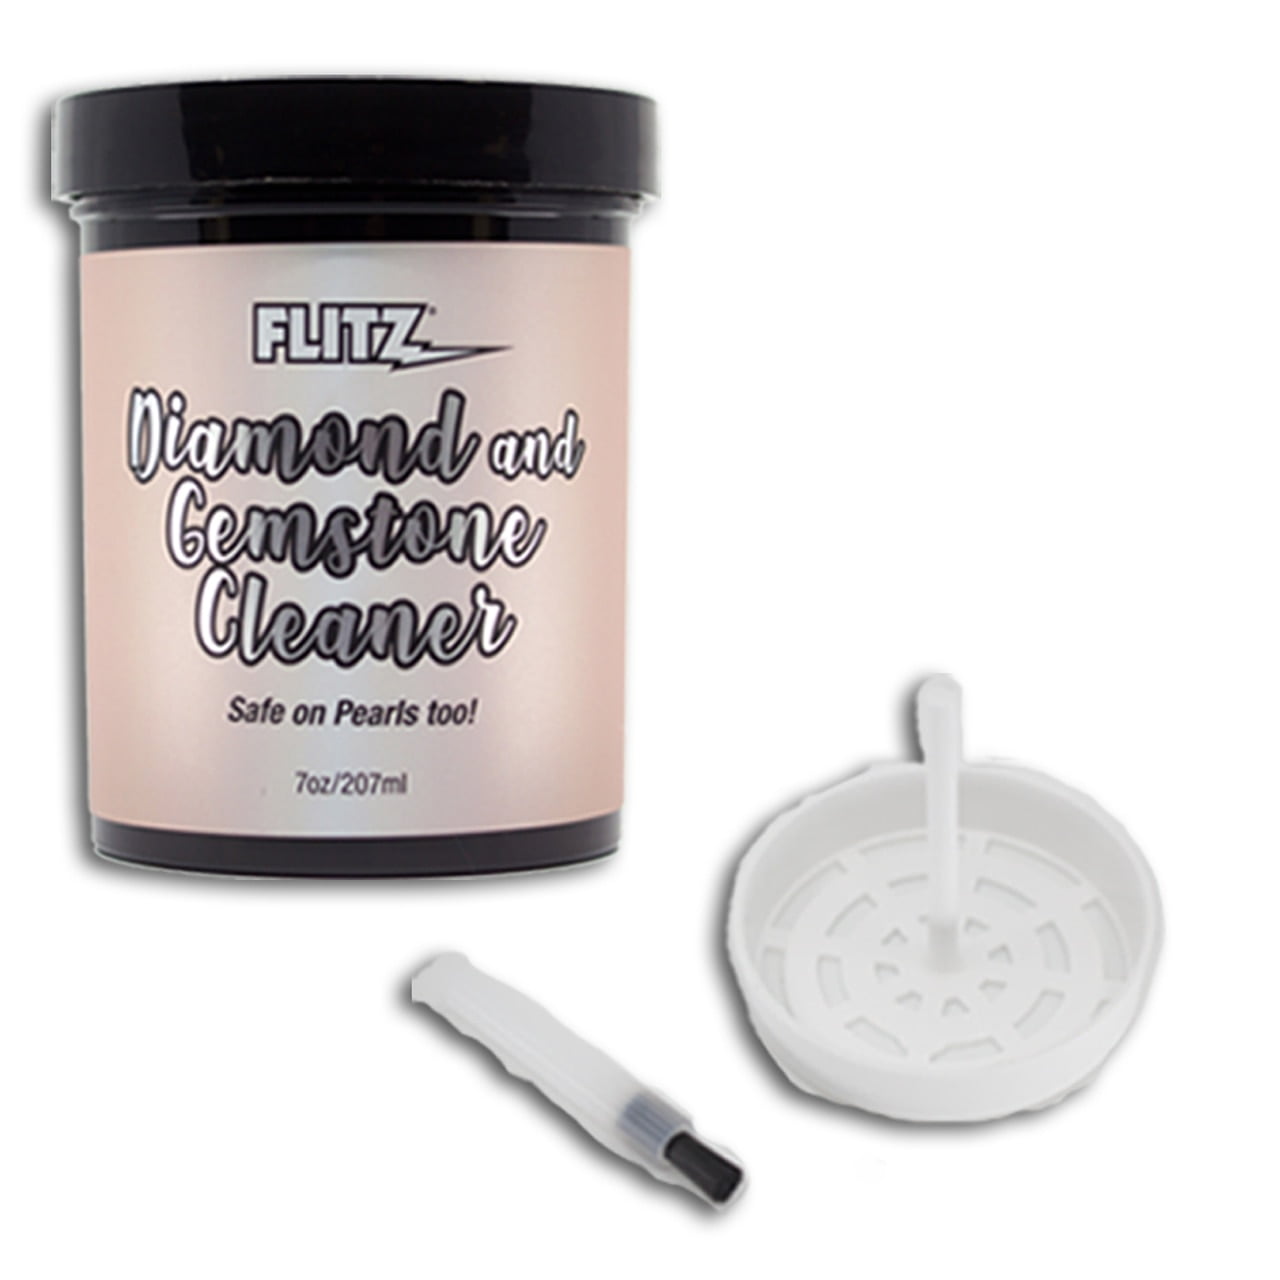 Flitz Diamond and Gemstone Cleaner – Fine Jewelry Cleaner for all Jewelry,  Gold, Diamond Rings, Sterling Silver, Platinum and More - 7 oz Dip Jar with